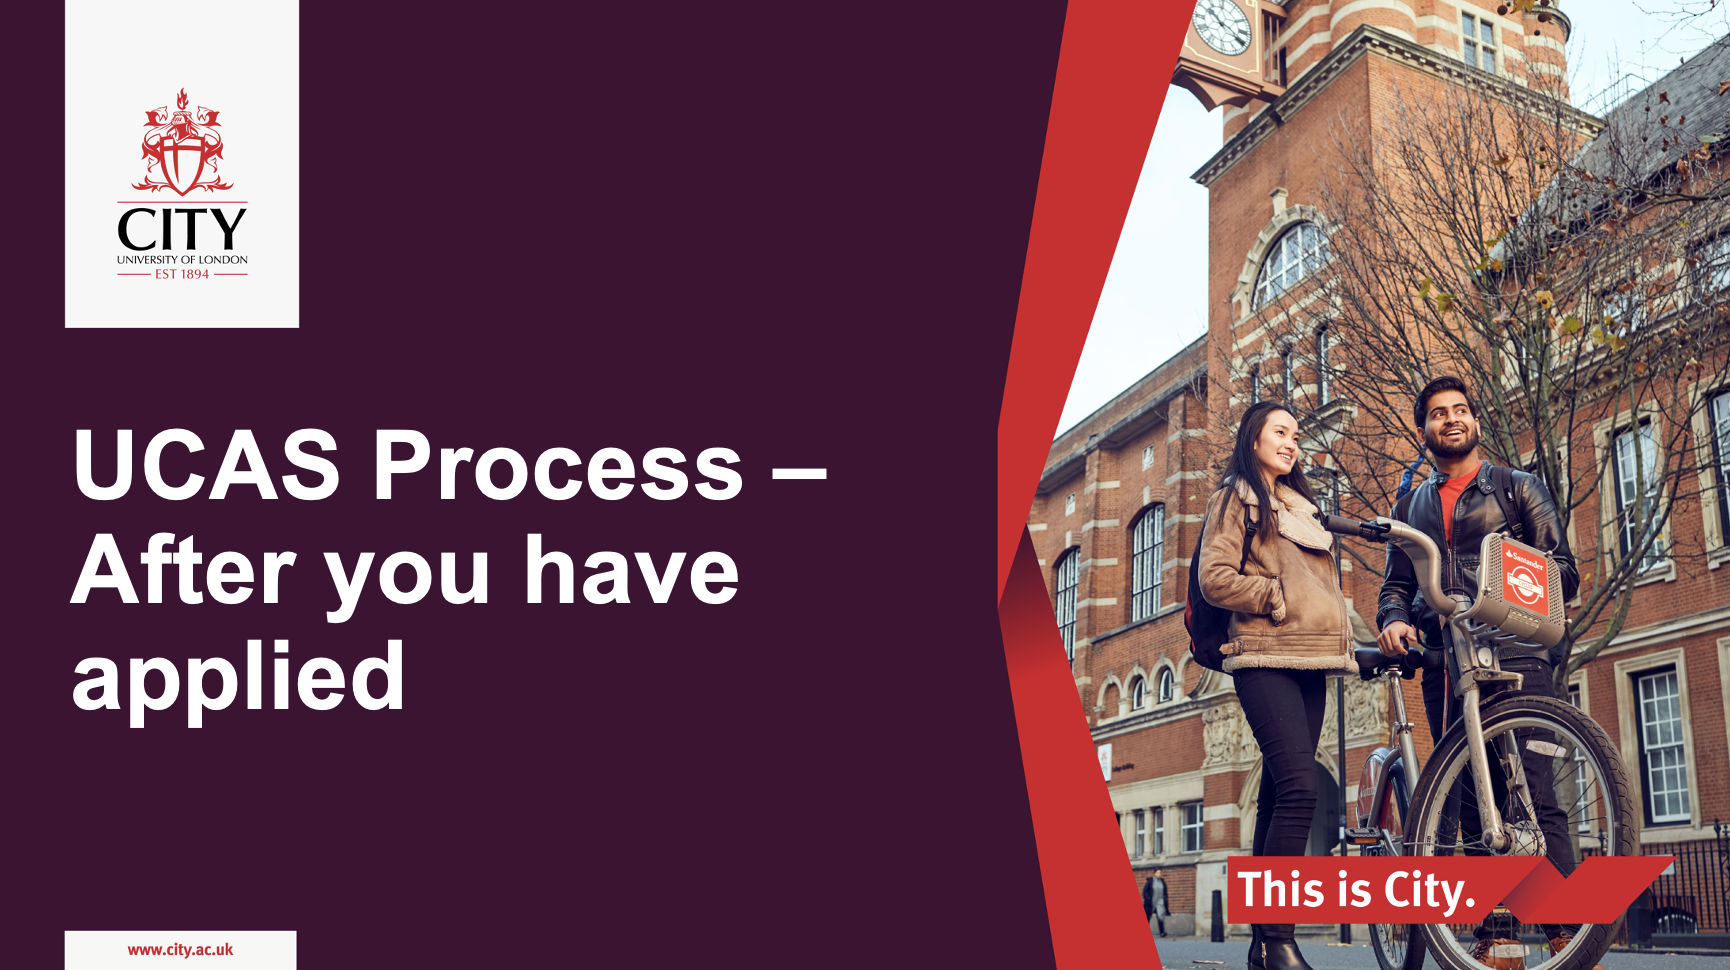 UCAS Process - After you have applied